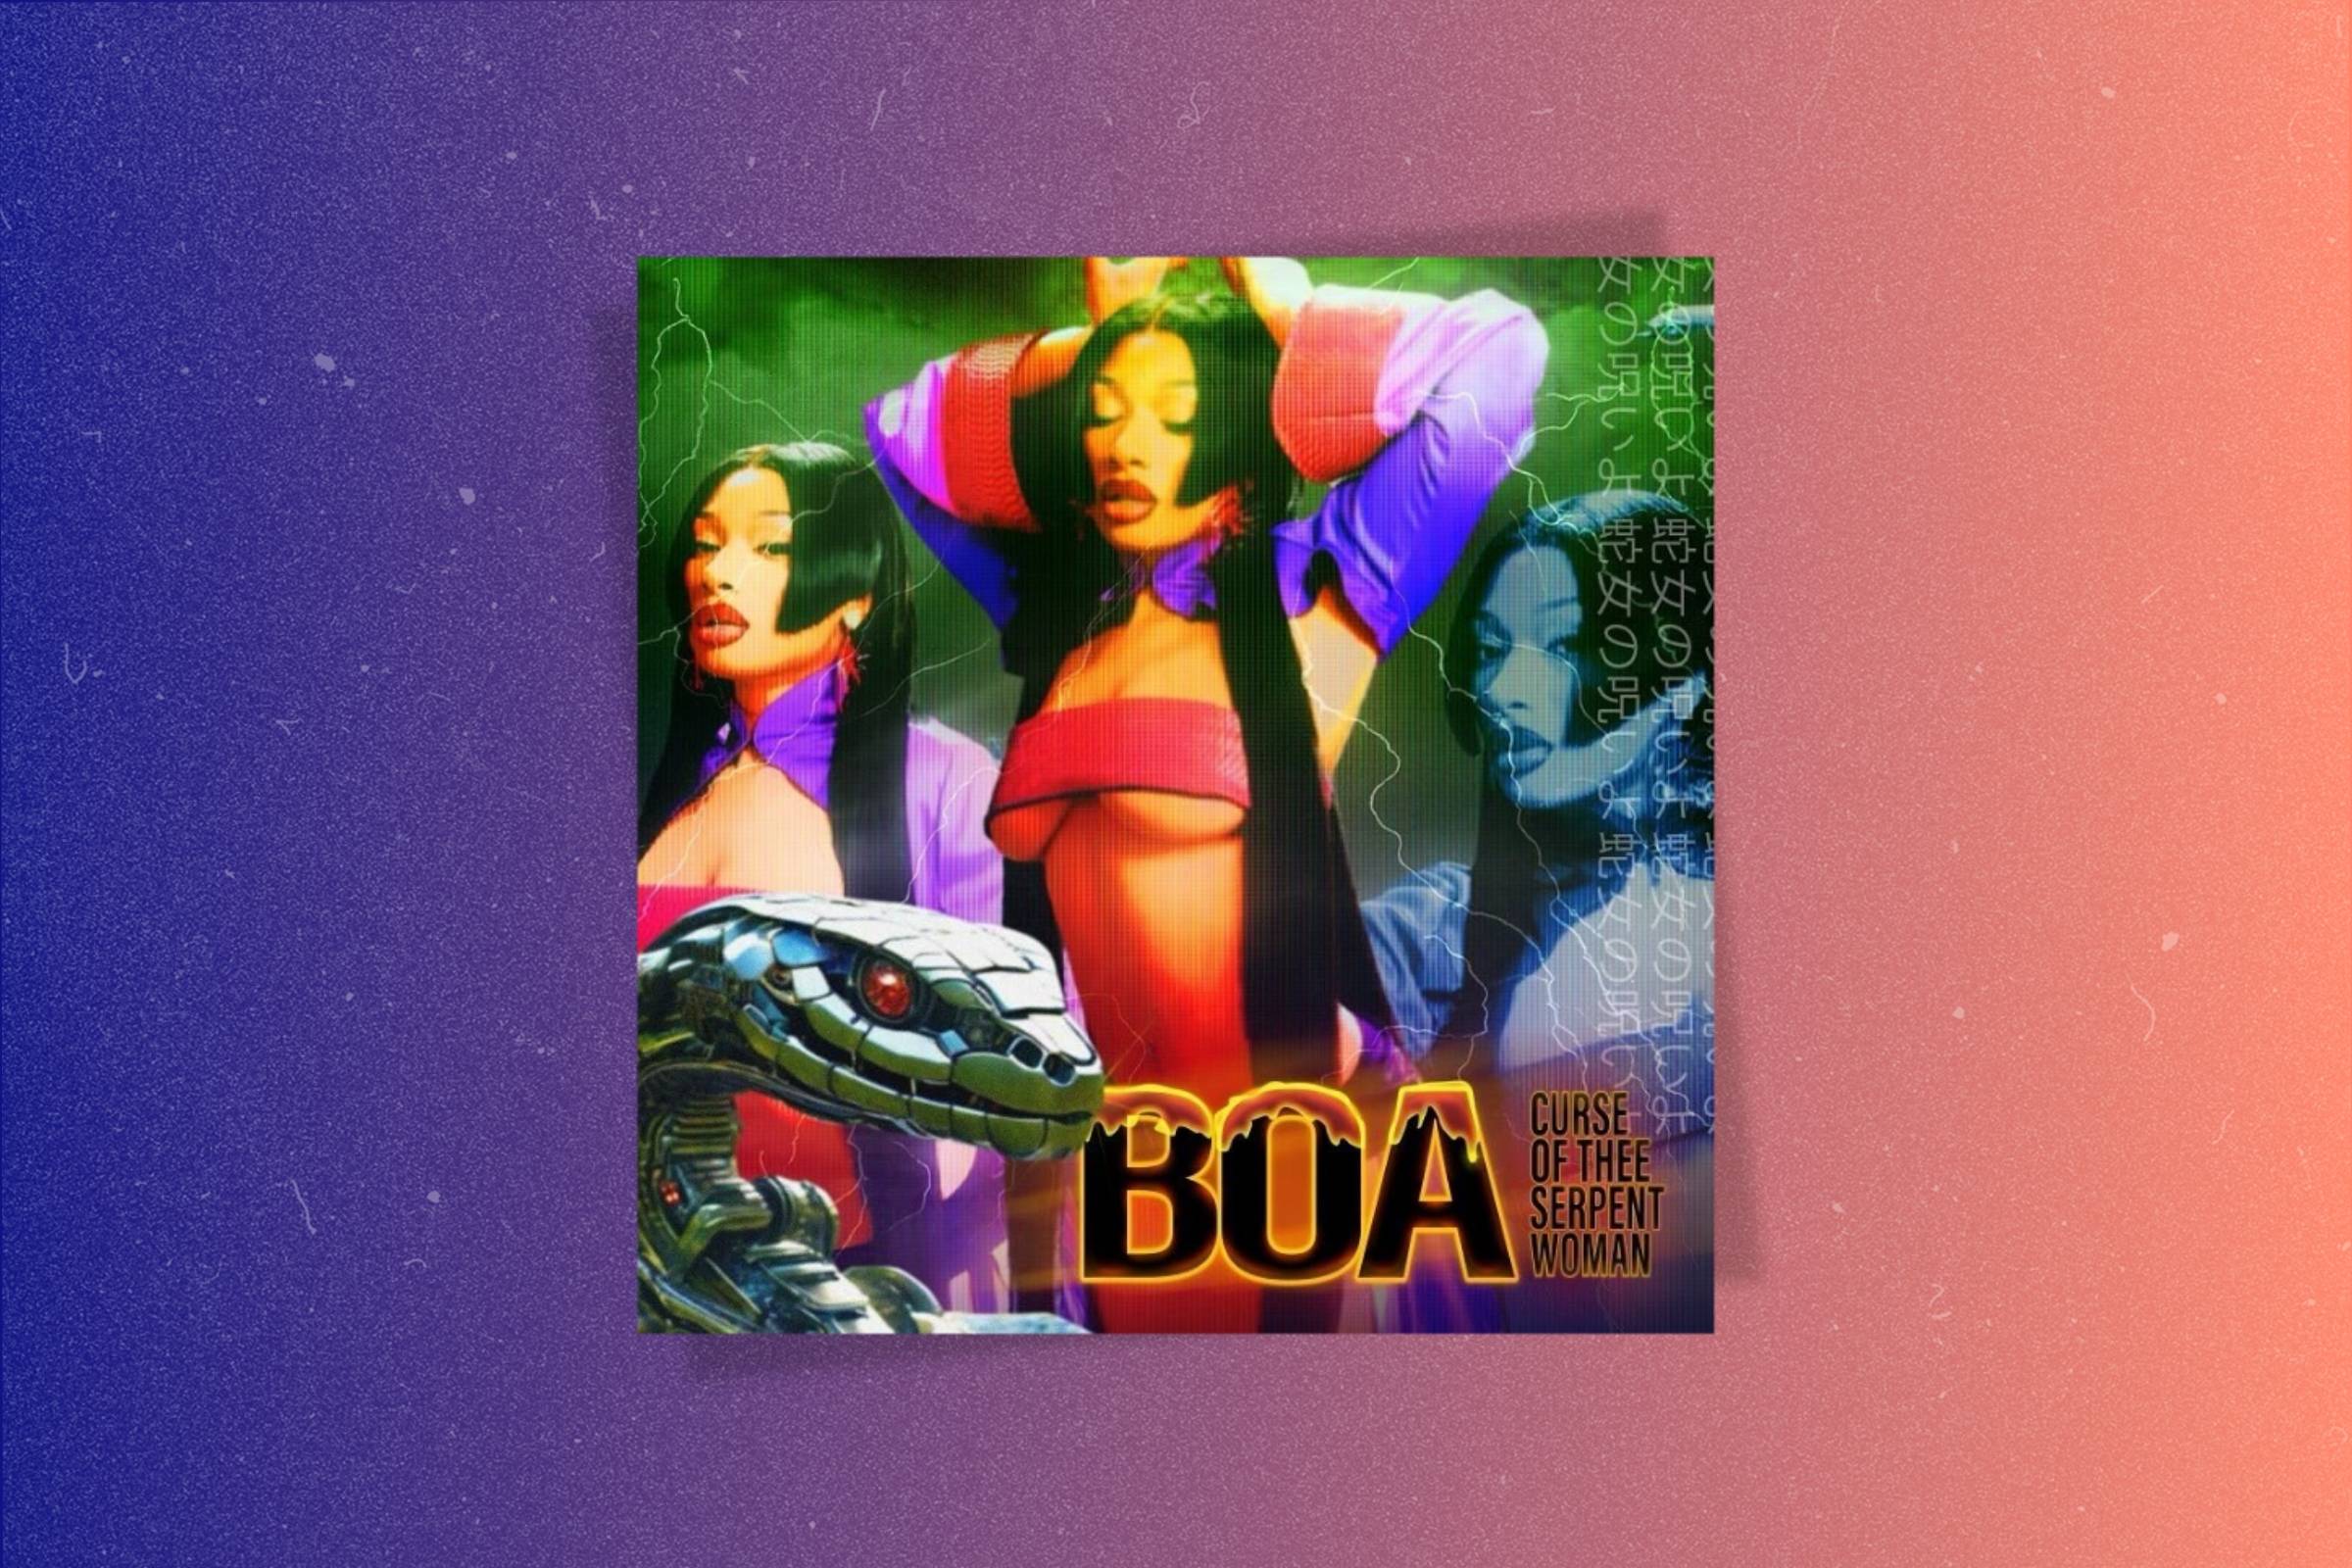 The cover art for Megan Thee Stallions song Boa